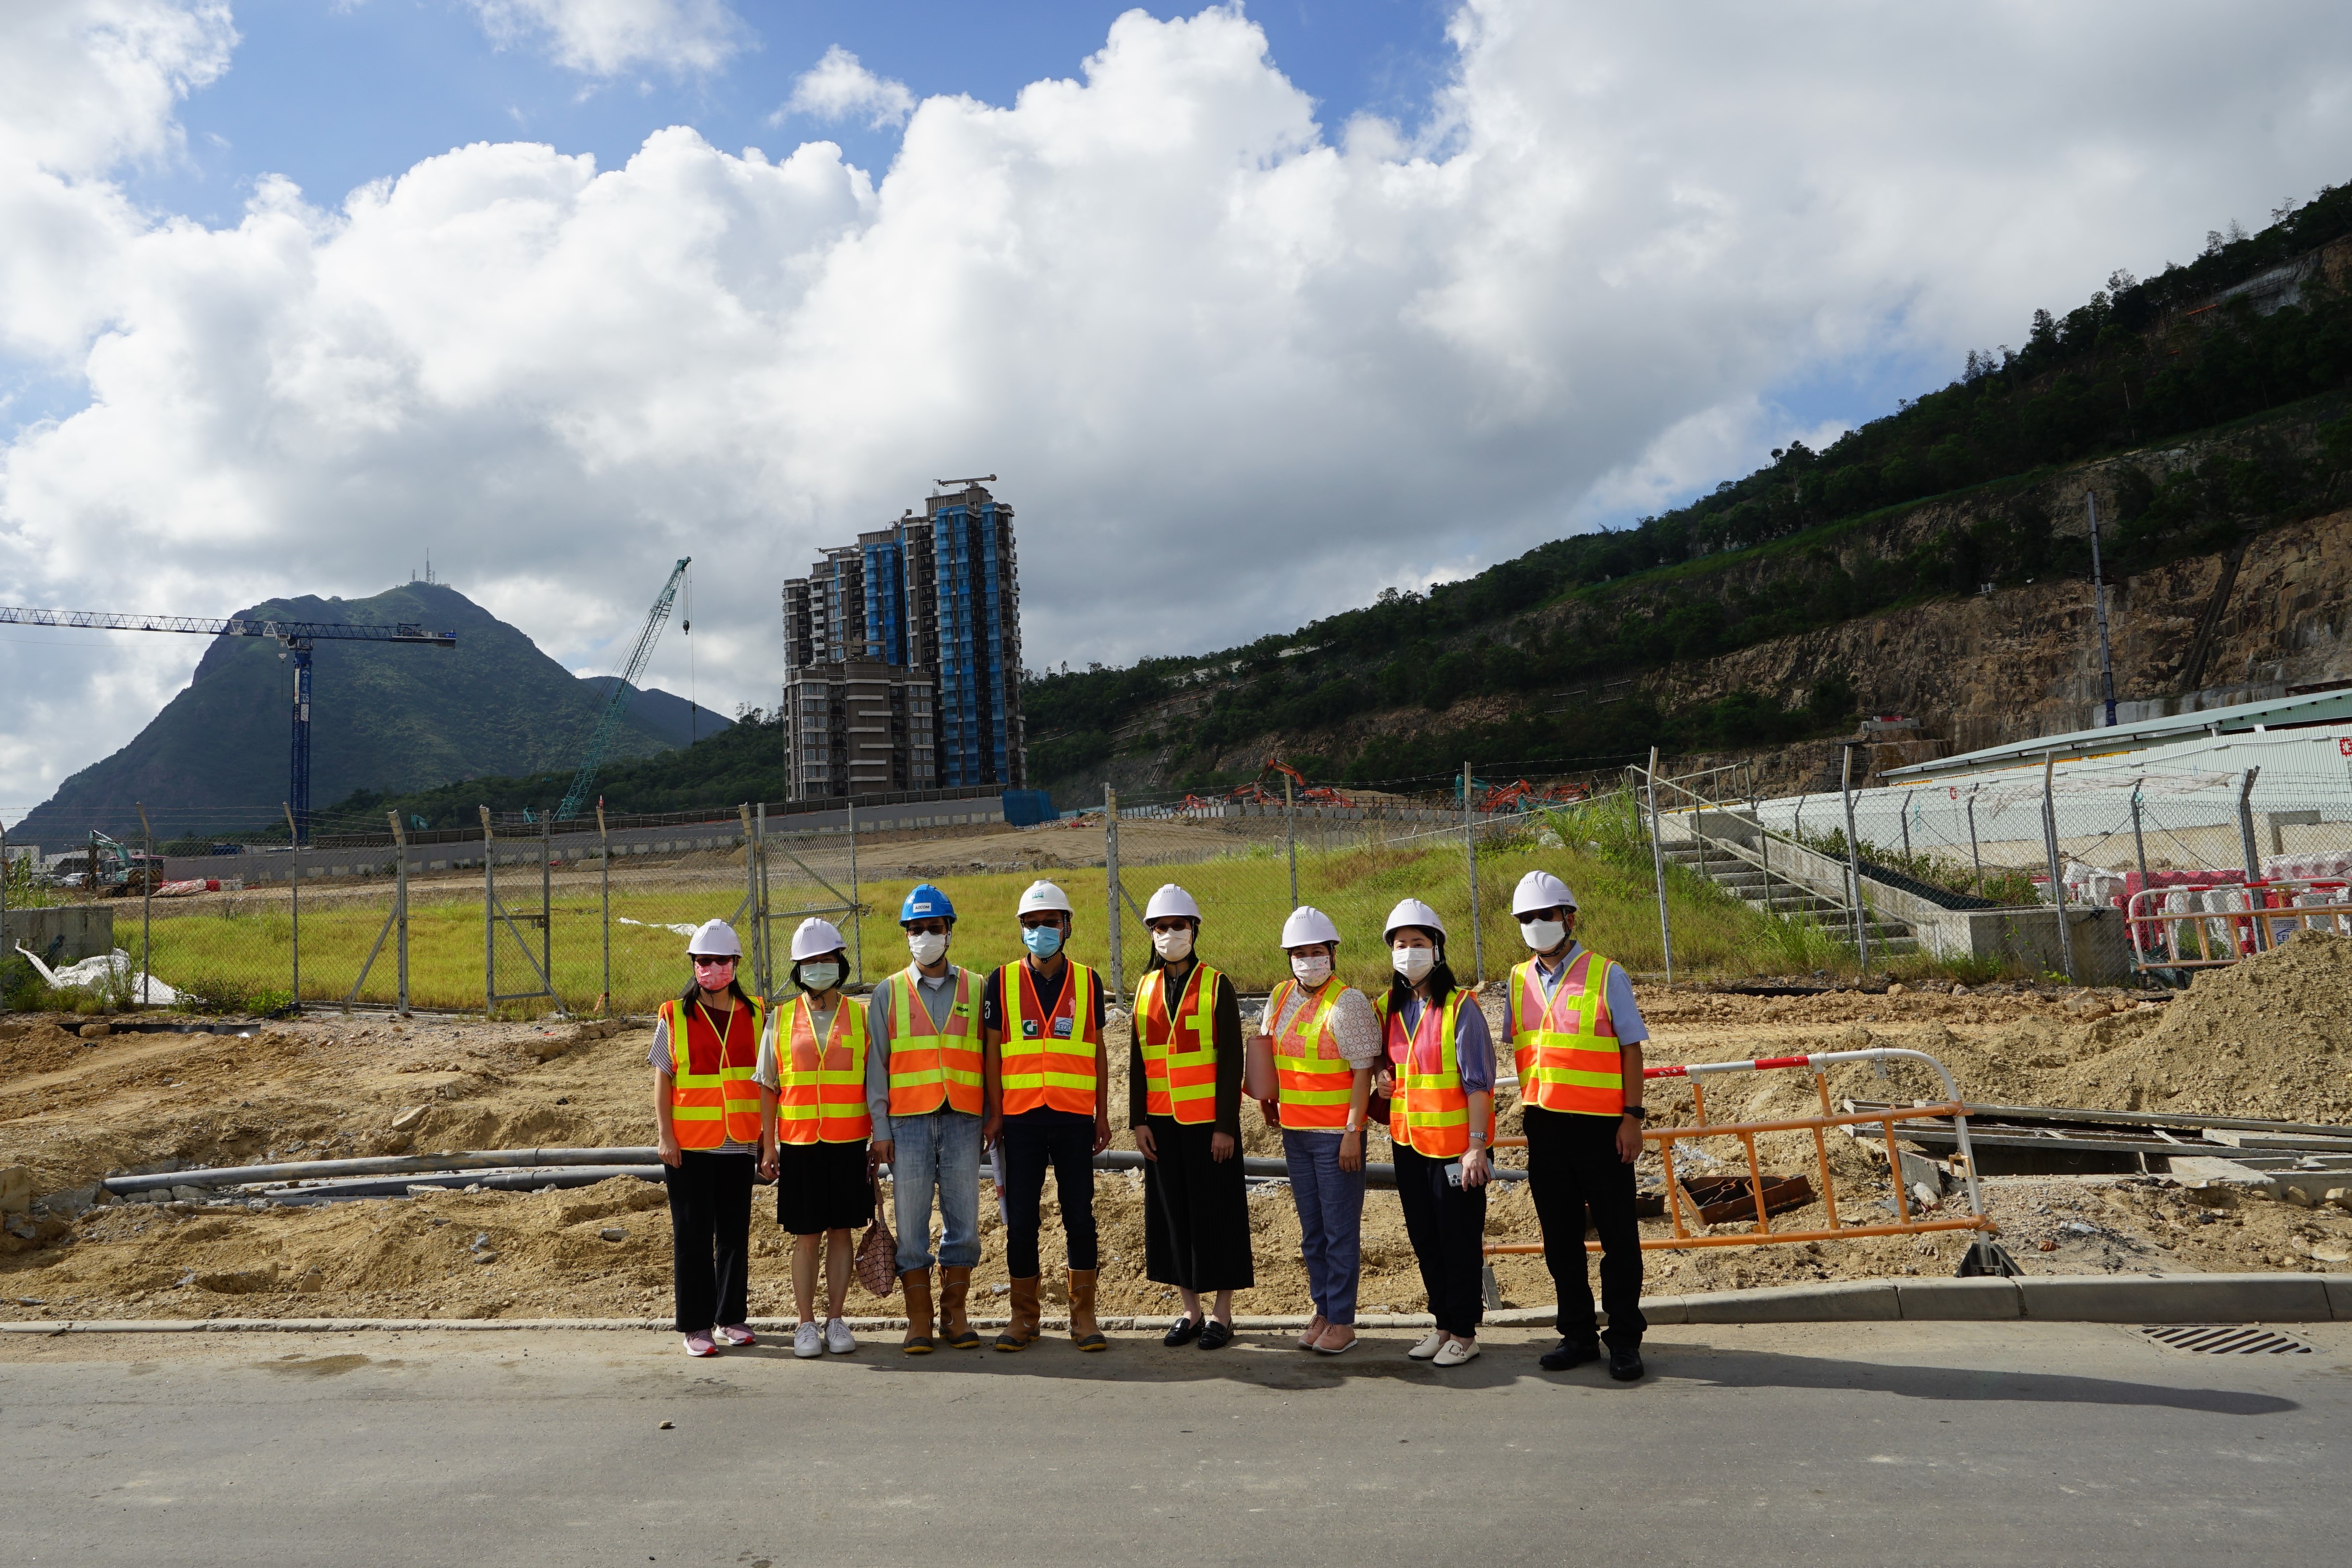 Representatives of Education Bureau and Canton Road Government Primary School had a site visit to the new school site with the engineering team